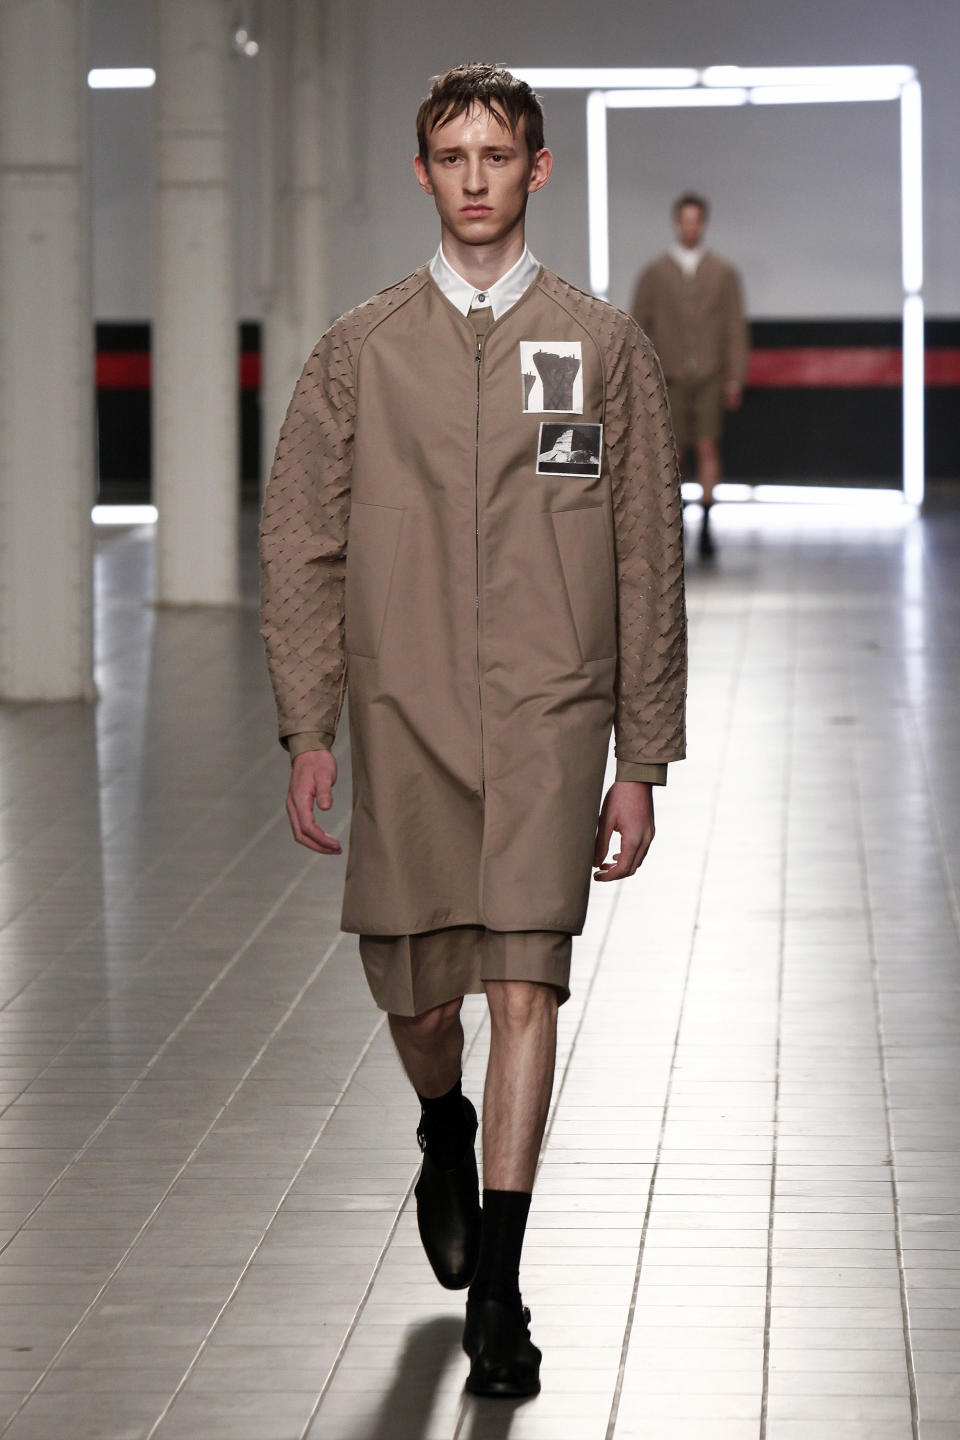 A model presents a creation by German fashion designer Damir Doma as part of his men's fashion Spring-Summer 2014 collection, presented Saturday, June 29, 2013 in Paris. (AP Photo/Thibault Camus)